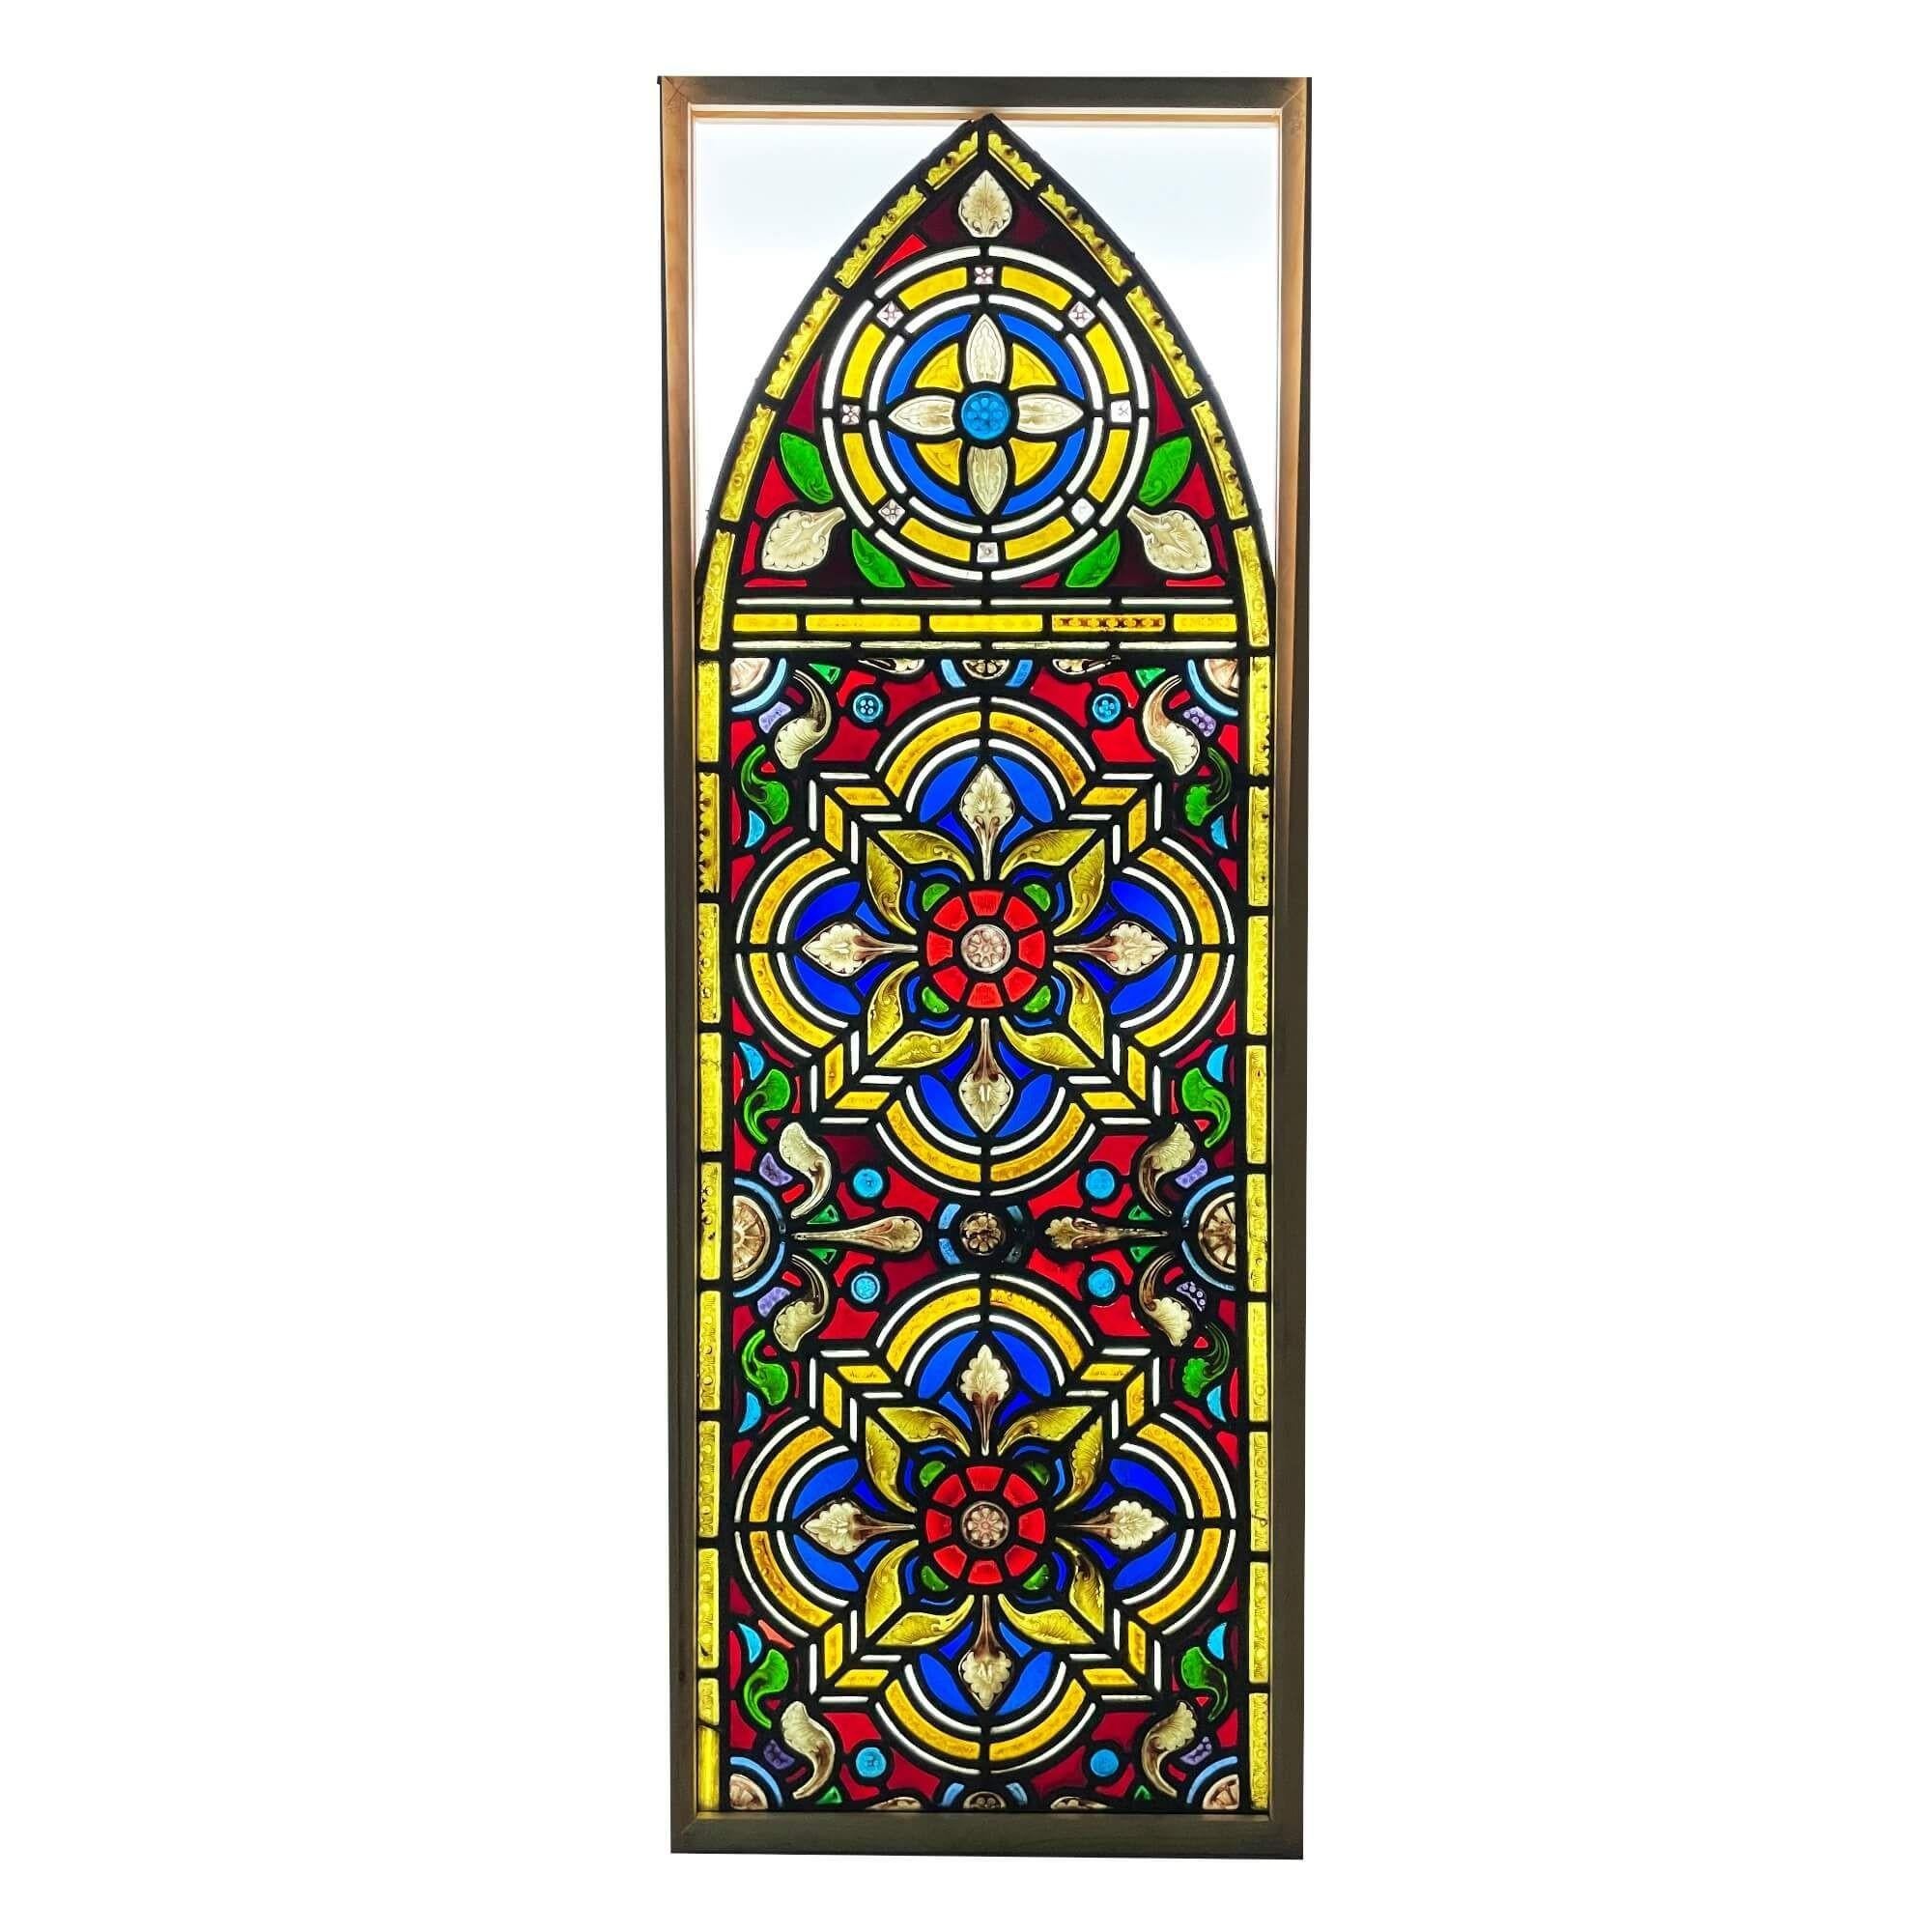 An antique Victorian arched stained glass window showcasing a stylised Tudor rose, originally from a church in northern England.

Three hand painted detailed flowers, thought to be the Tudor Rose, sit at the heart of this Victorian era stained glass